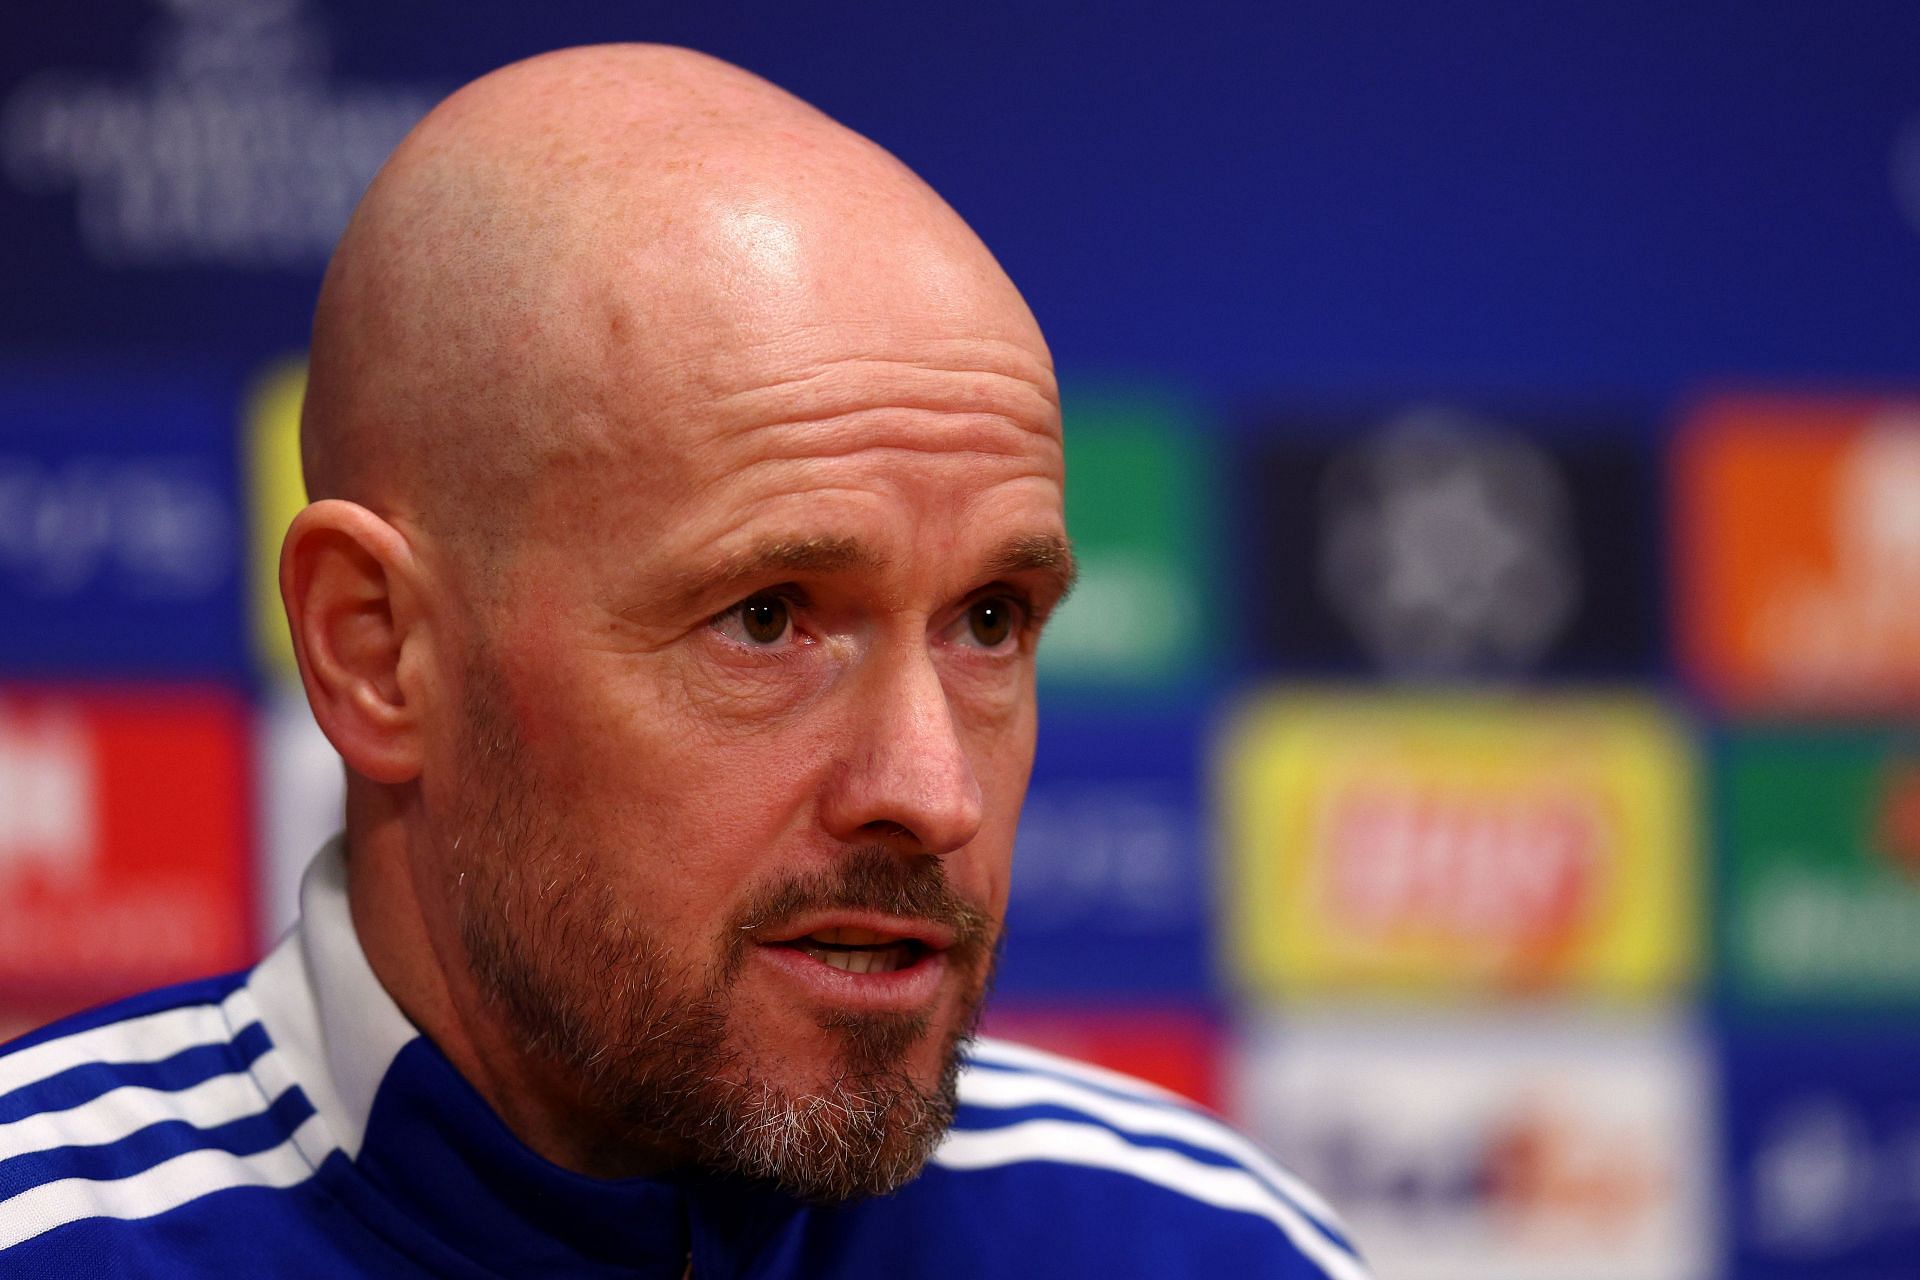 Erik ten Hag will take over the reins at Manchester United this summer.